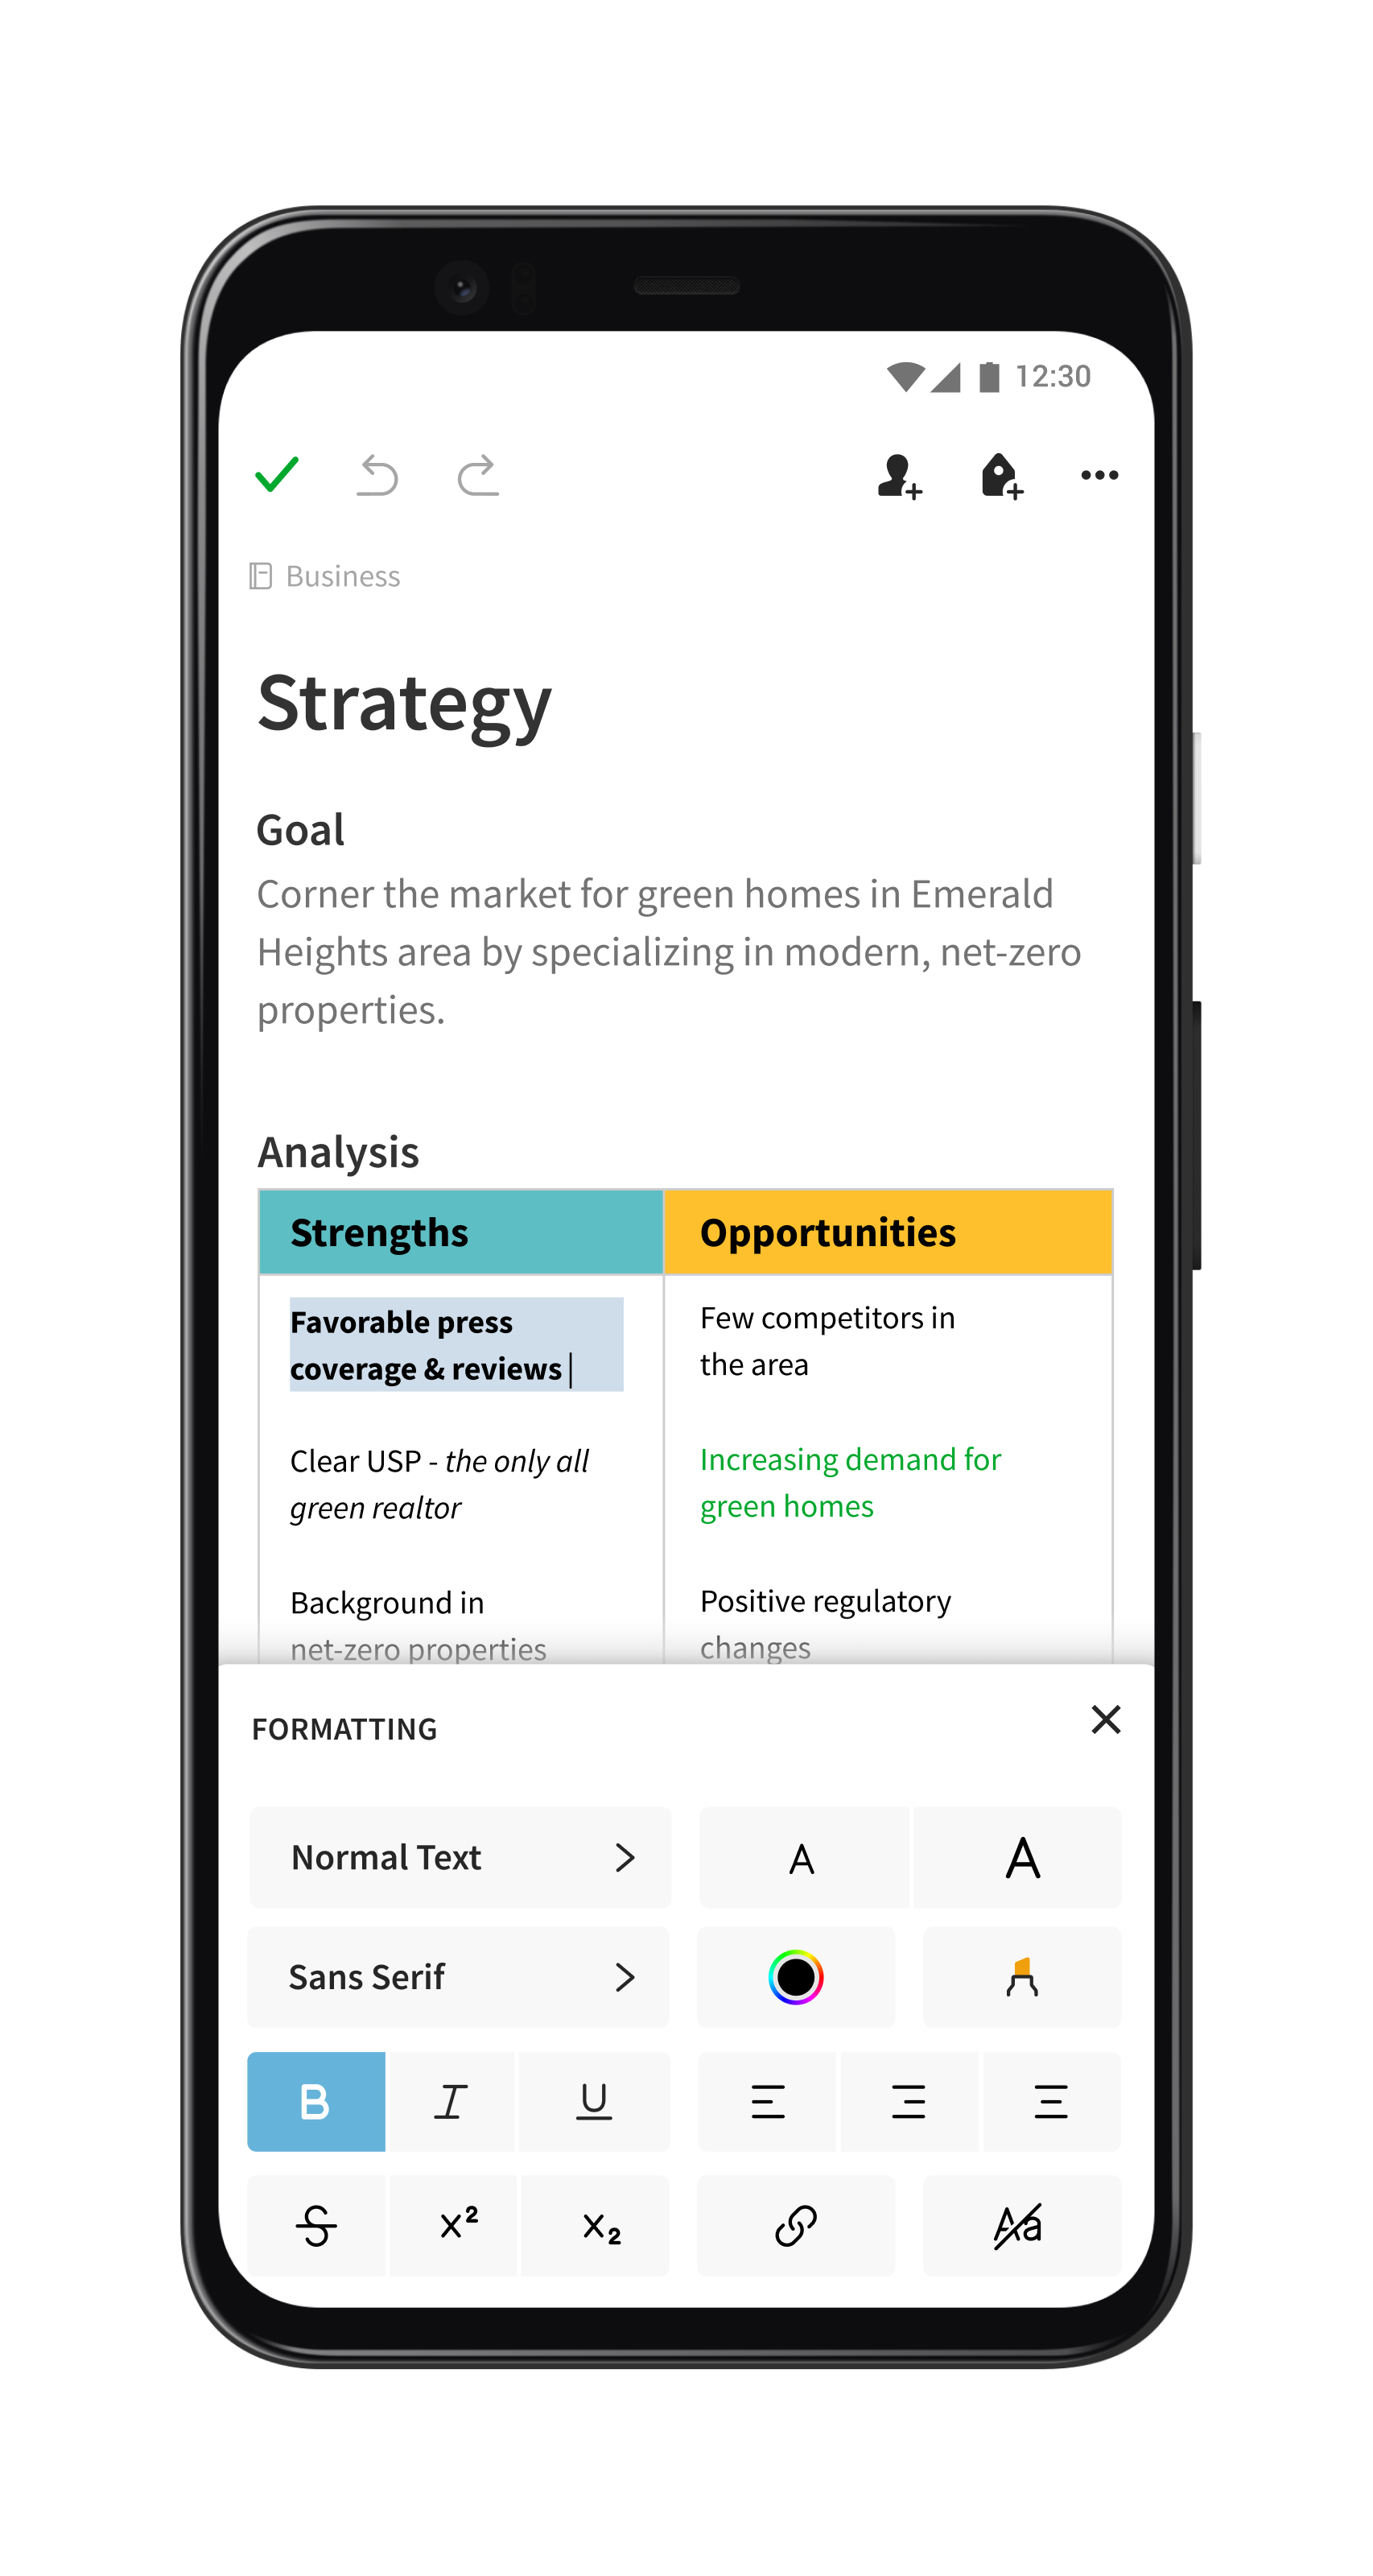 The new note editor in Evernote for Android